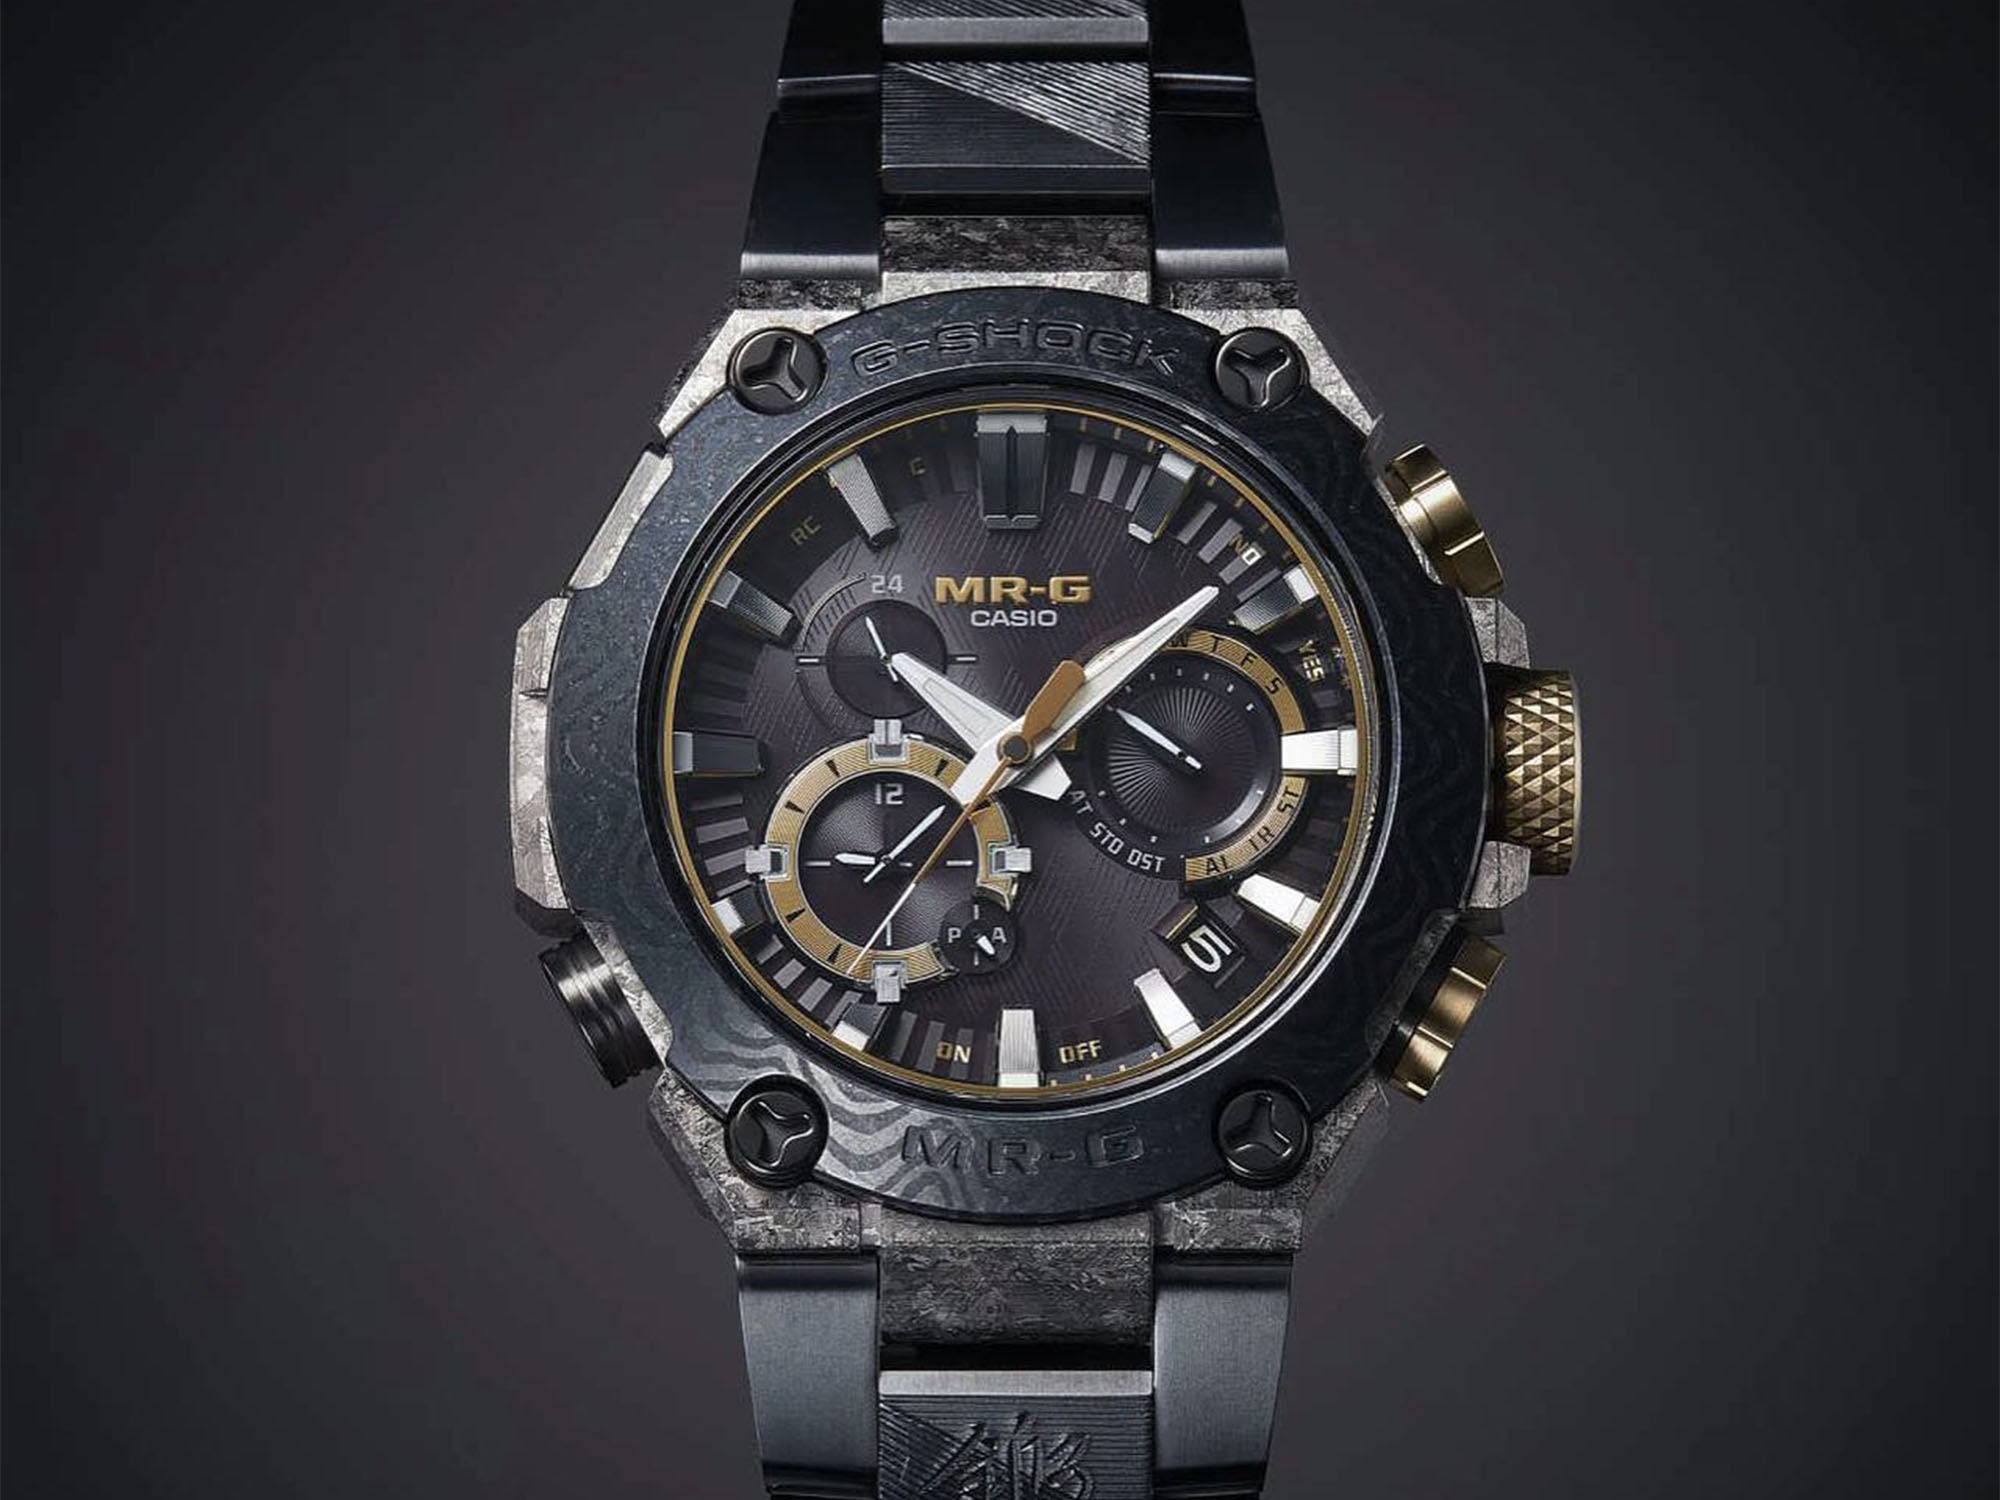 Counting Down the 5 Most Expensive G-Shock Watches